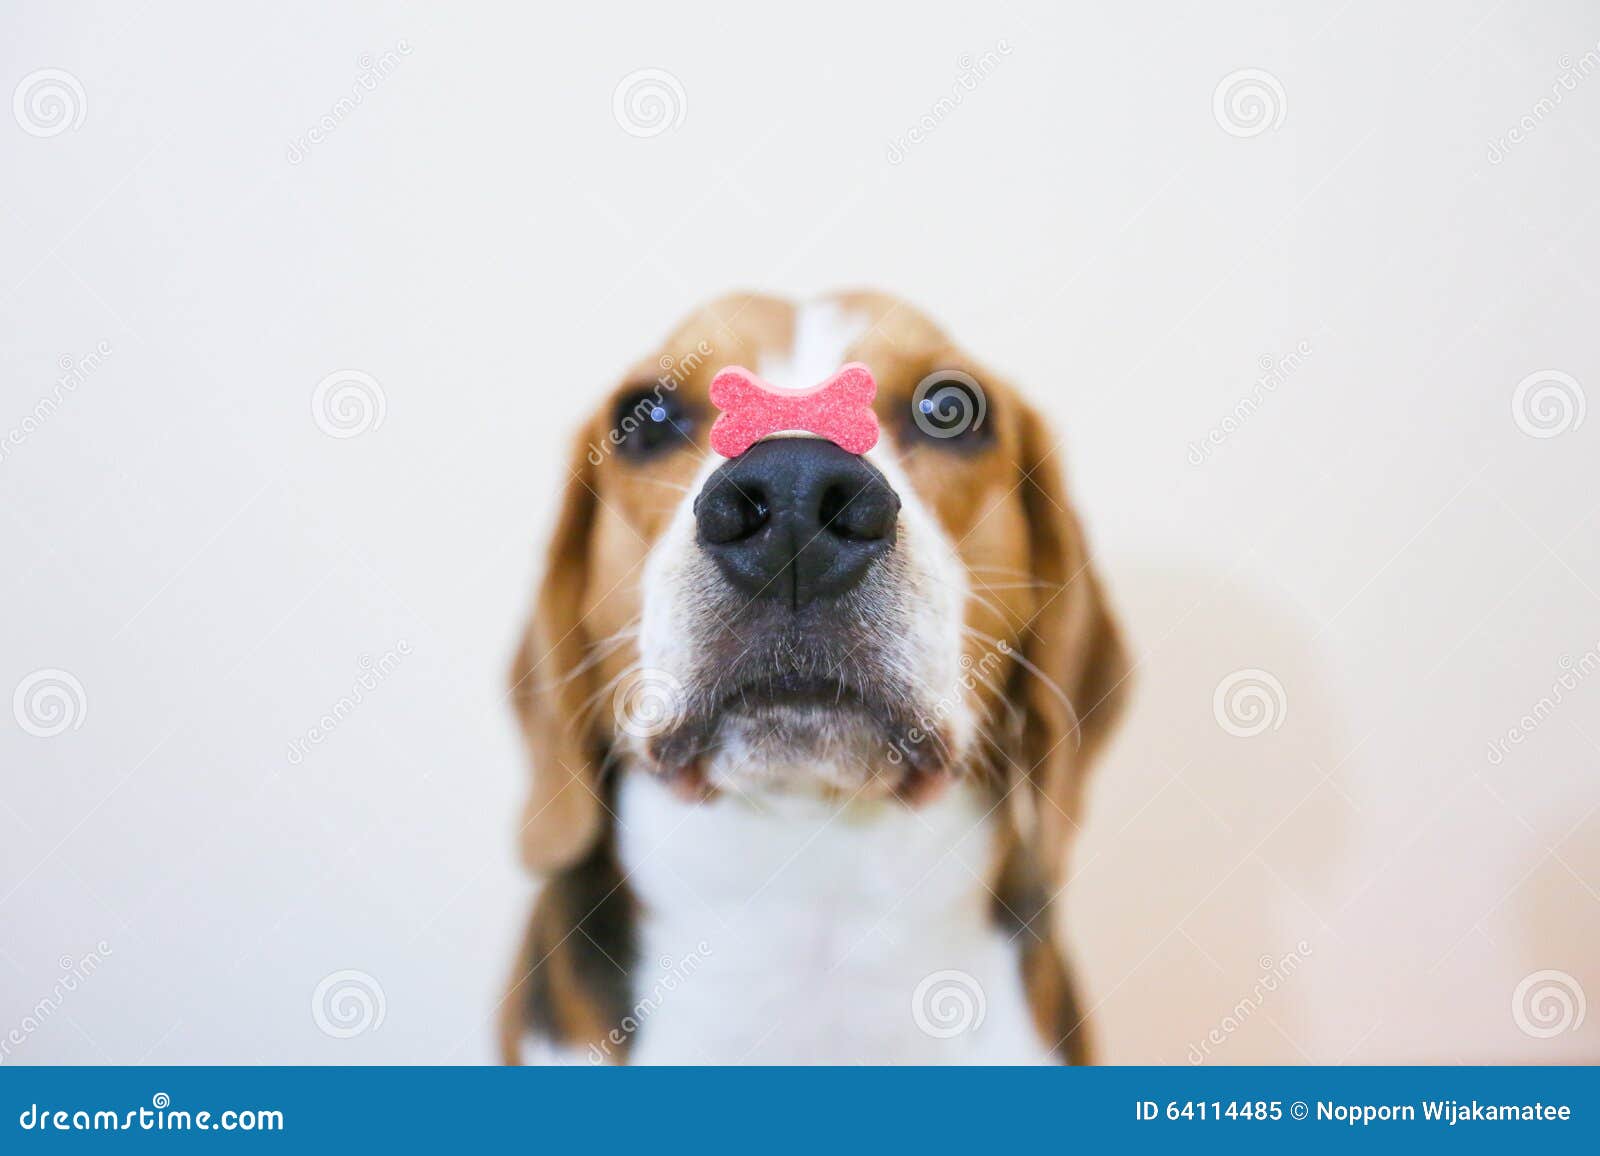 beagle dog is concentrate at snack